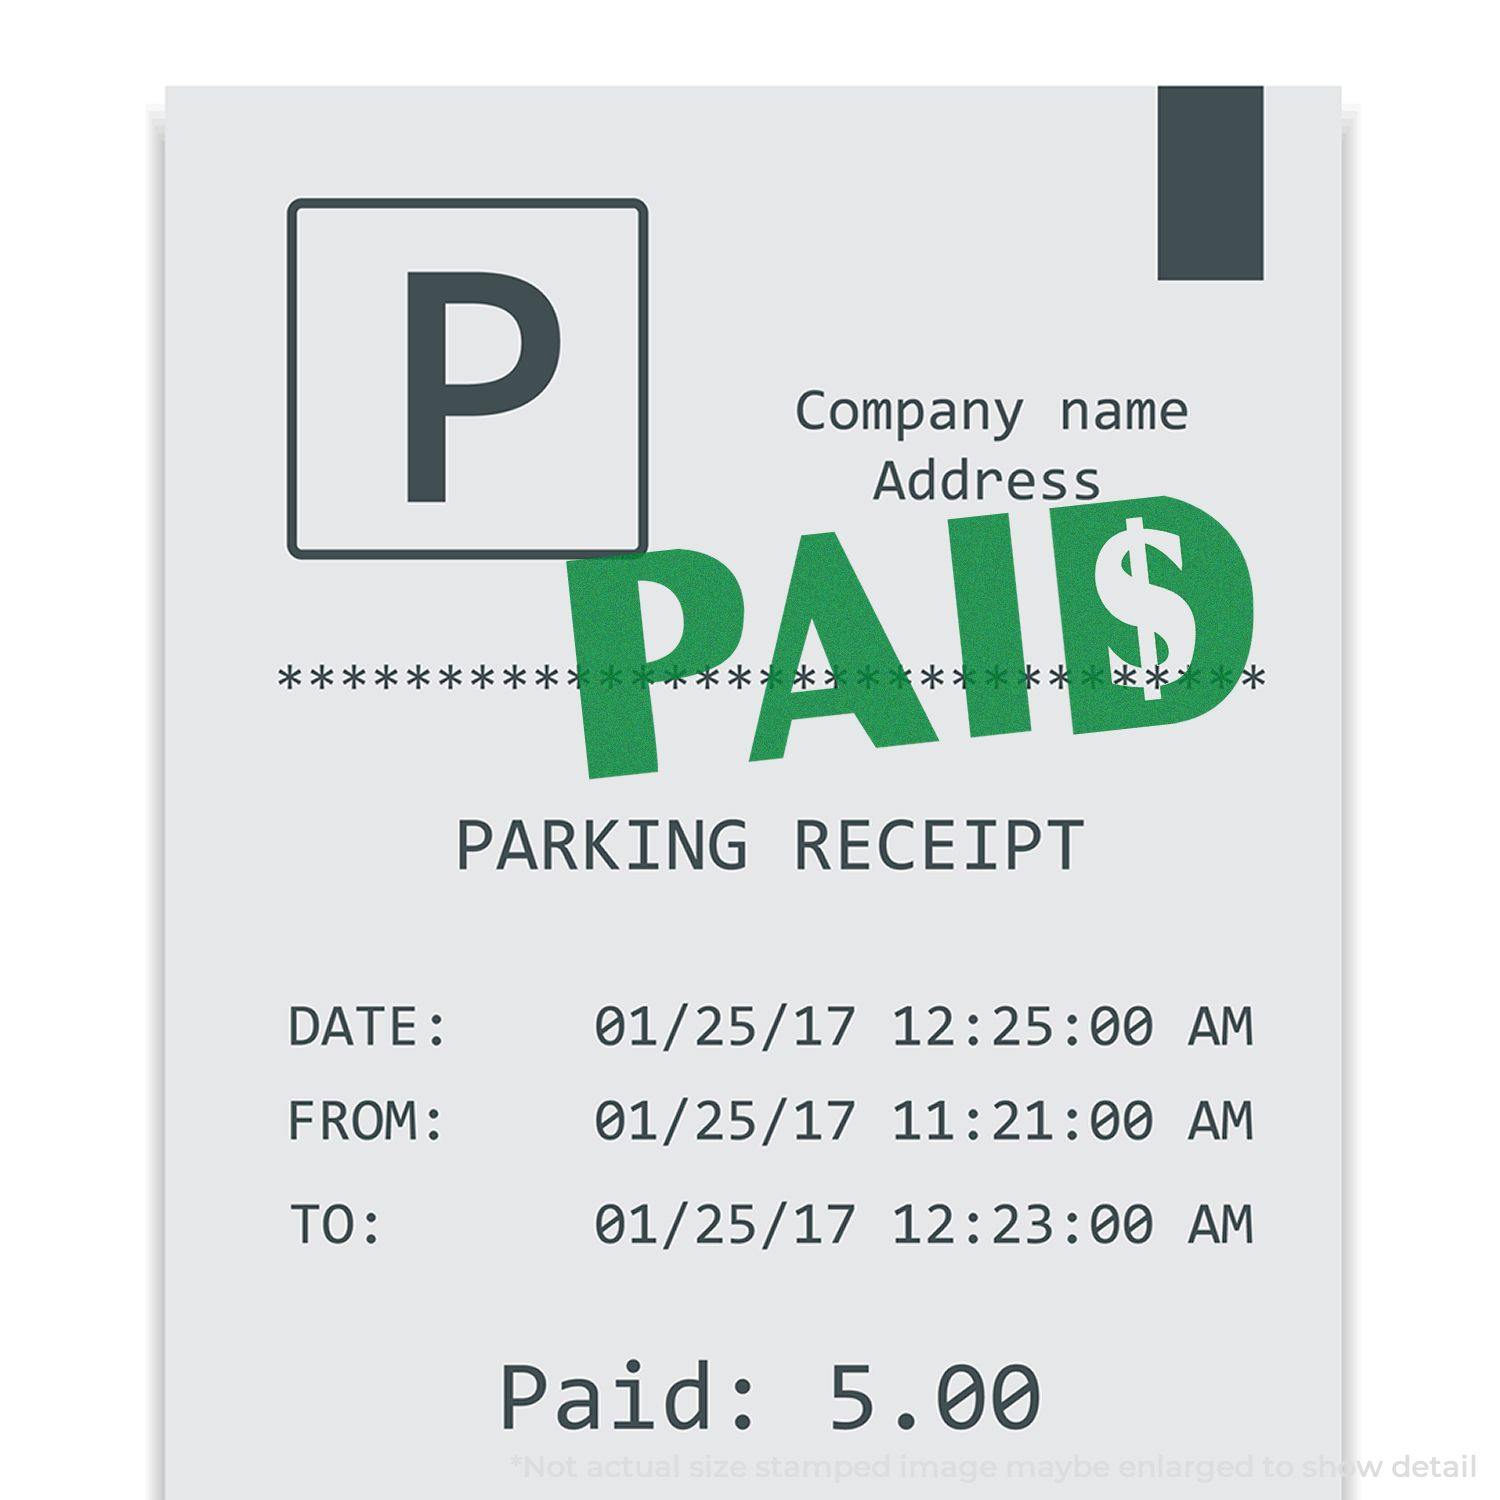 A stock office rubber stamp with a stamped image showing how the text "PAID" in bold font with a dollar sign inside the alphabet "D" is displayed after stamping.